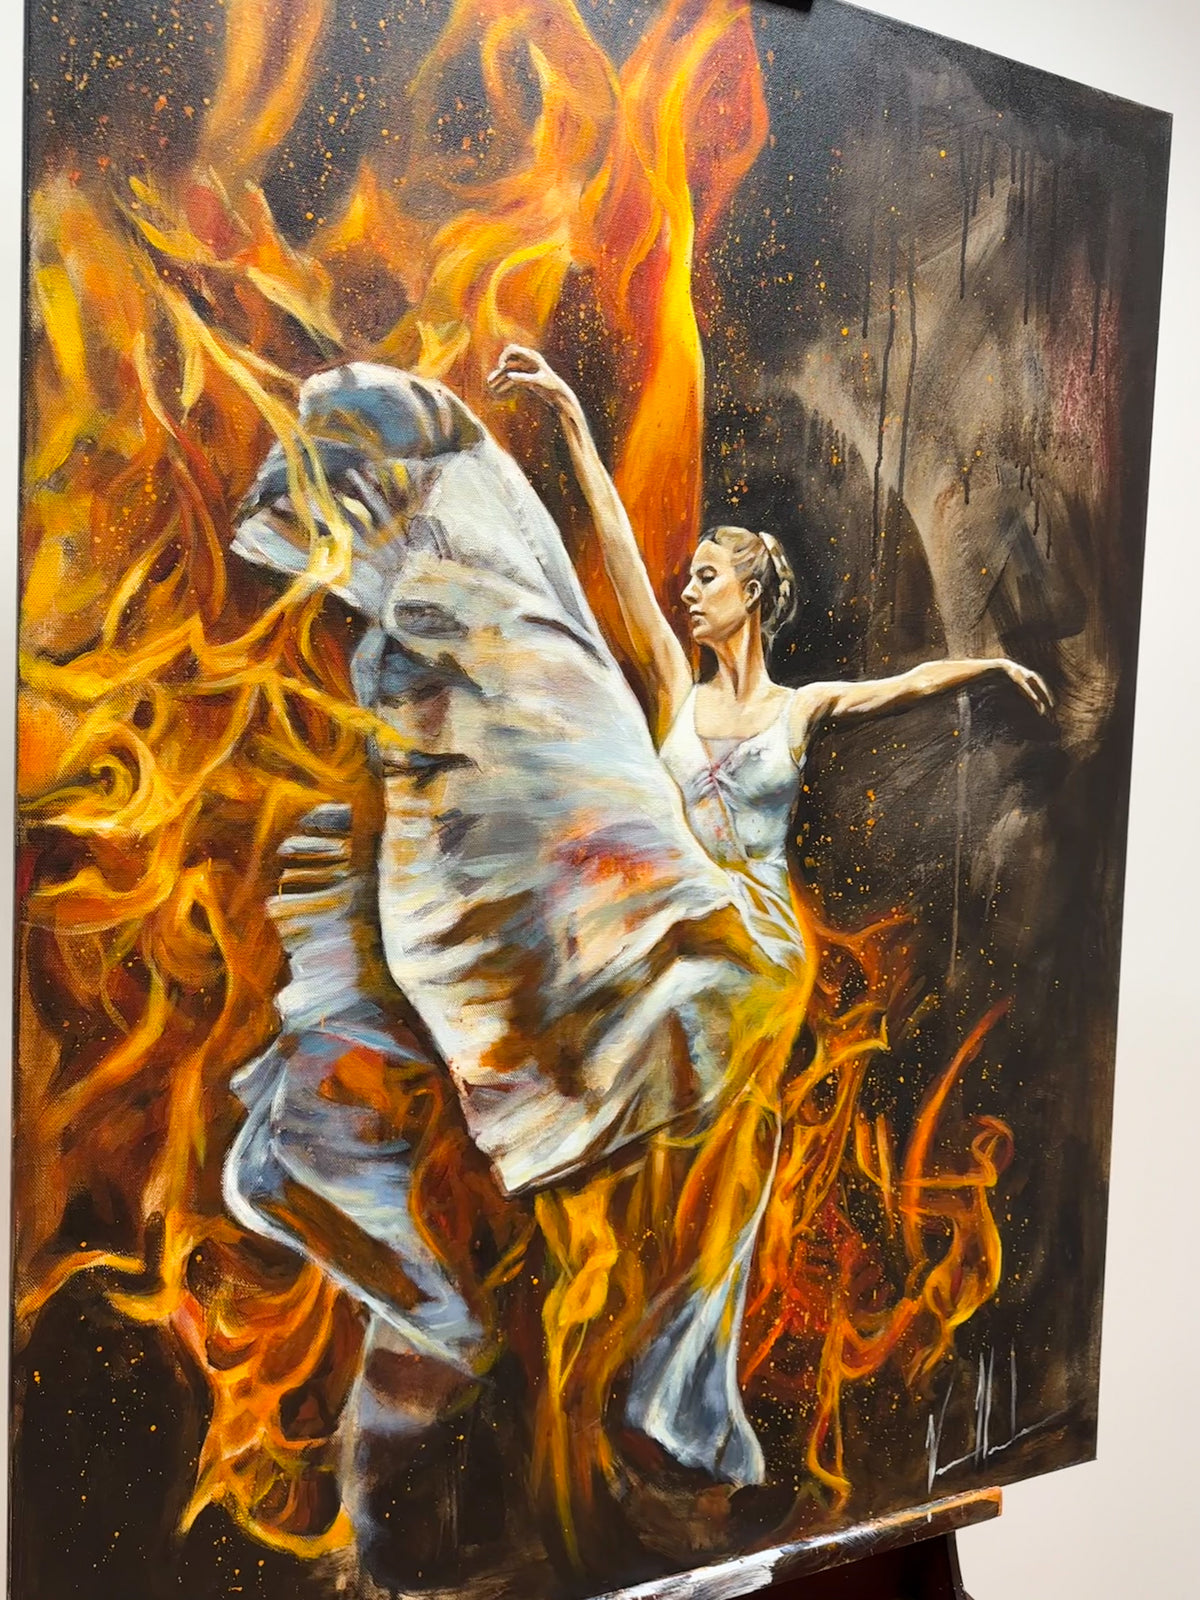 A Burning Flame Within - 30”x40” Original Acrylic Painting